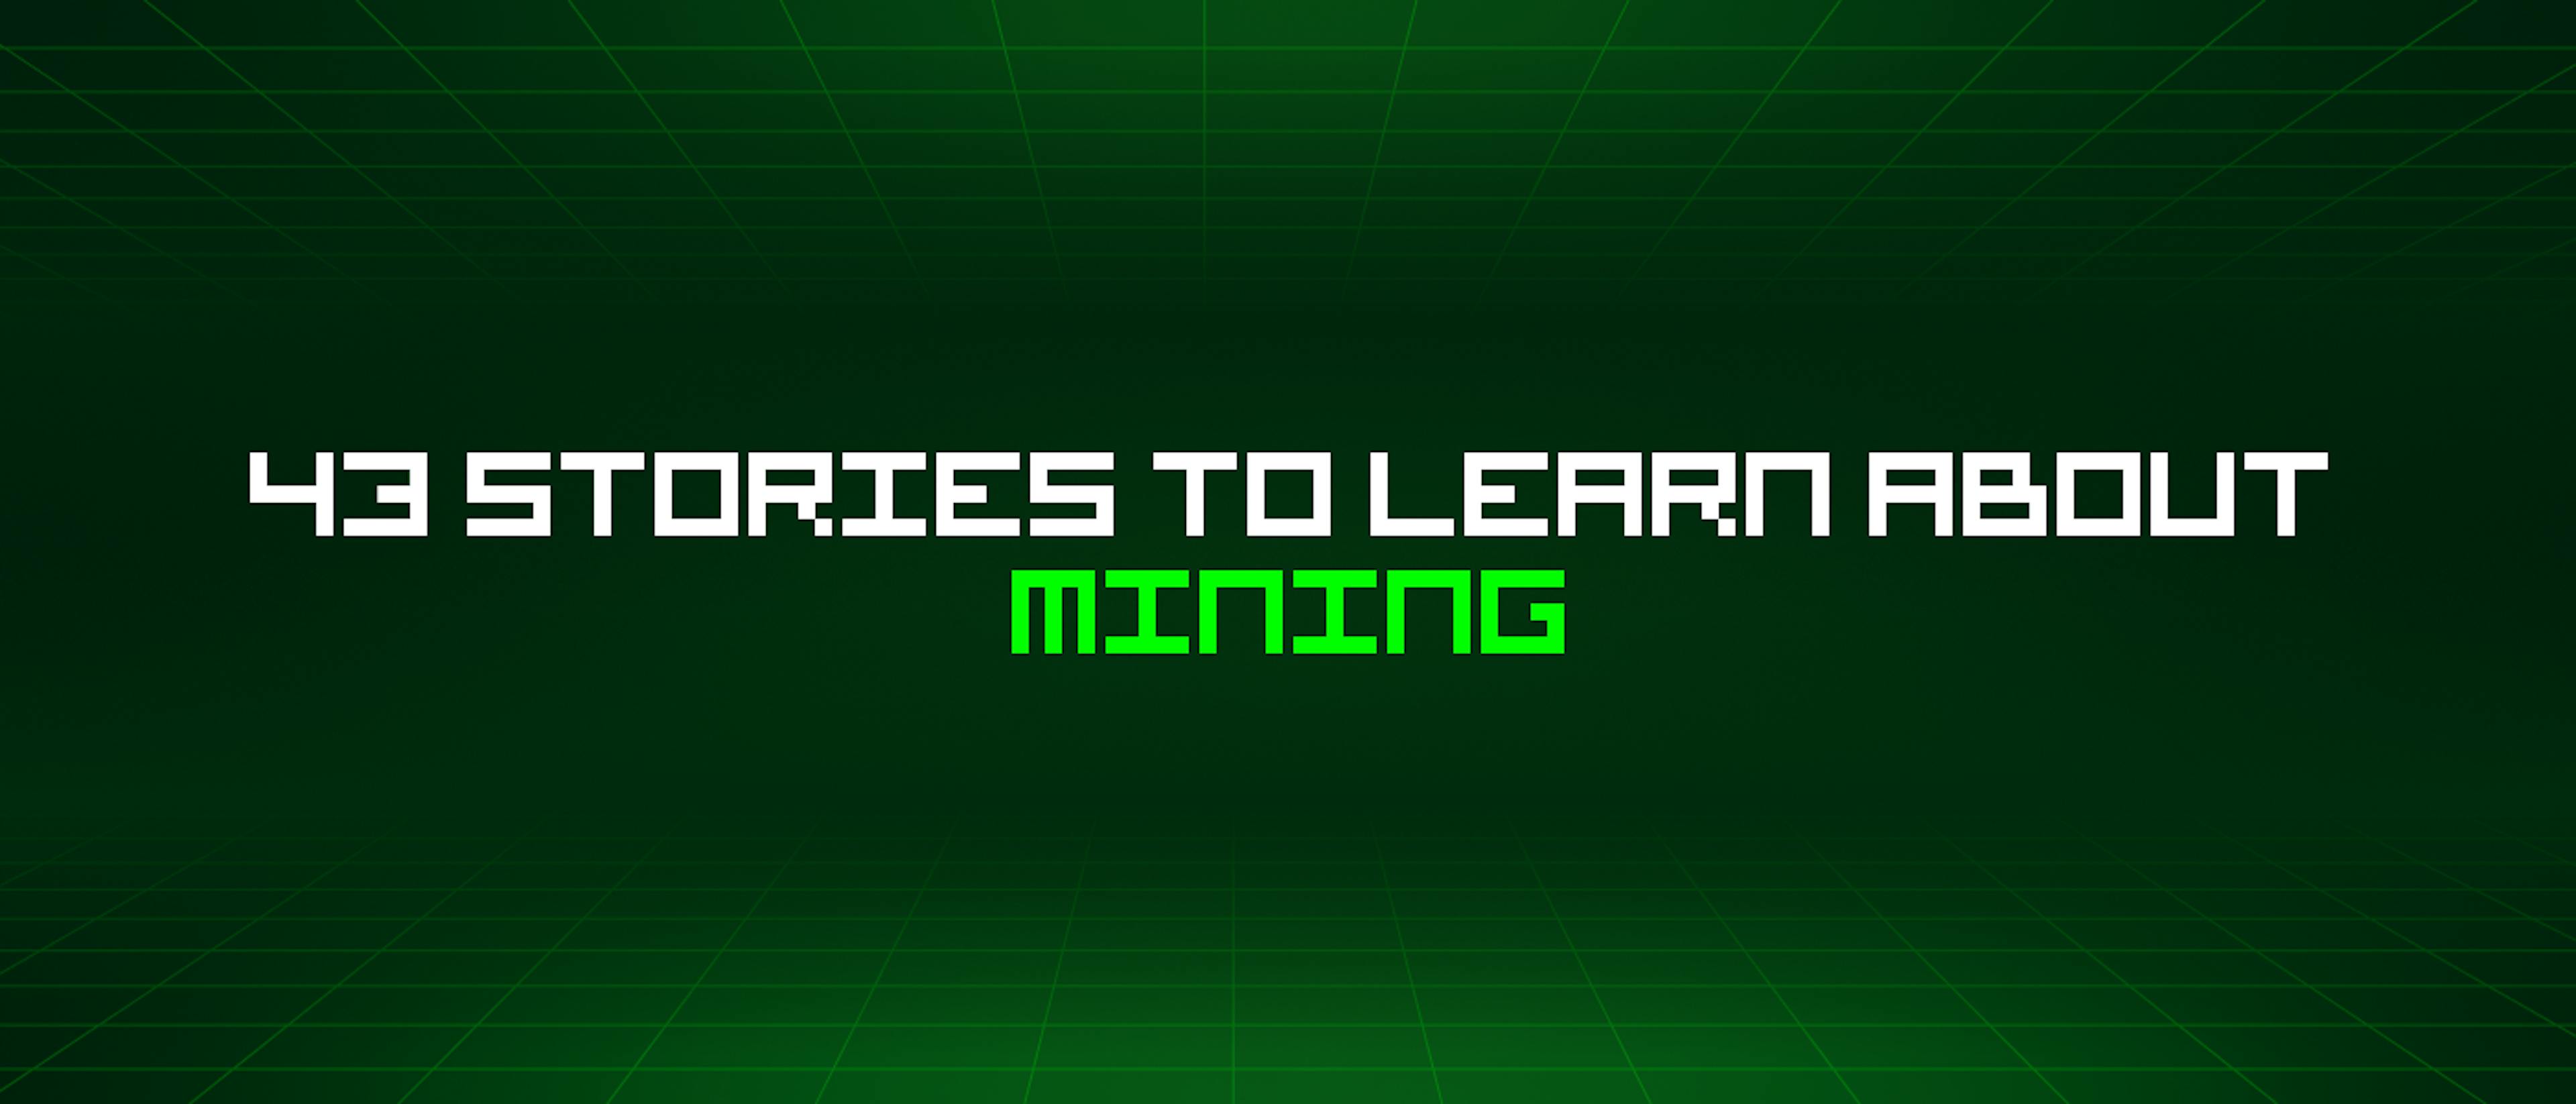 featured image - 43 Stories To Learn About Mining